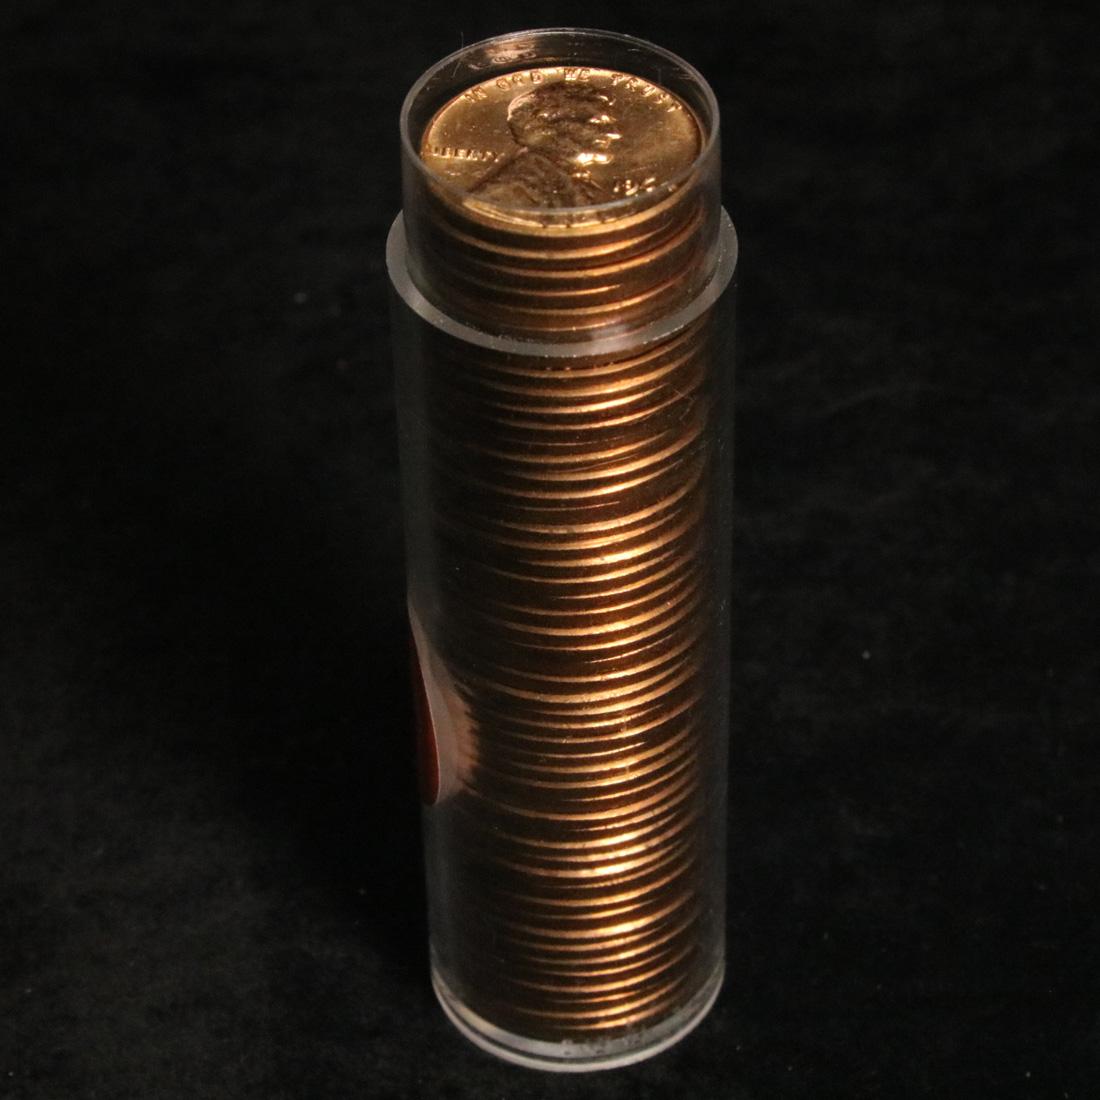 Full roll of 1964-d Lincoln Cents 1c Uncirculated Condition . .